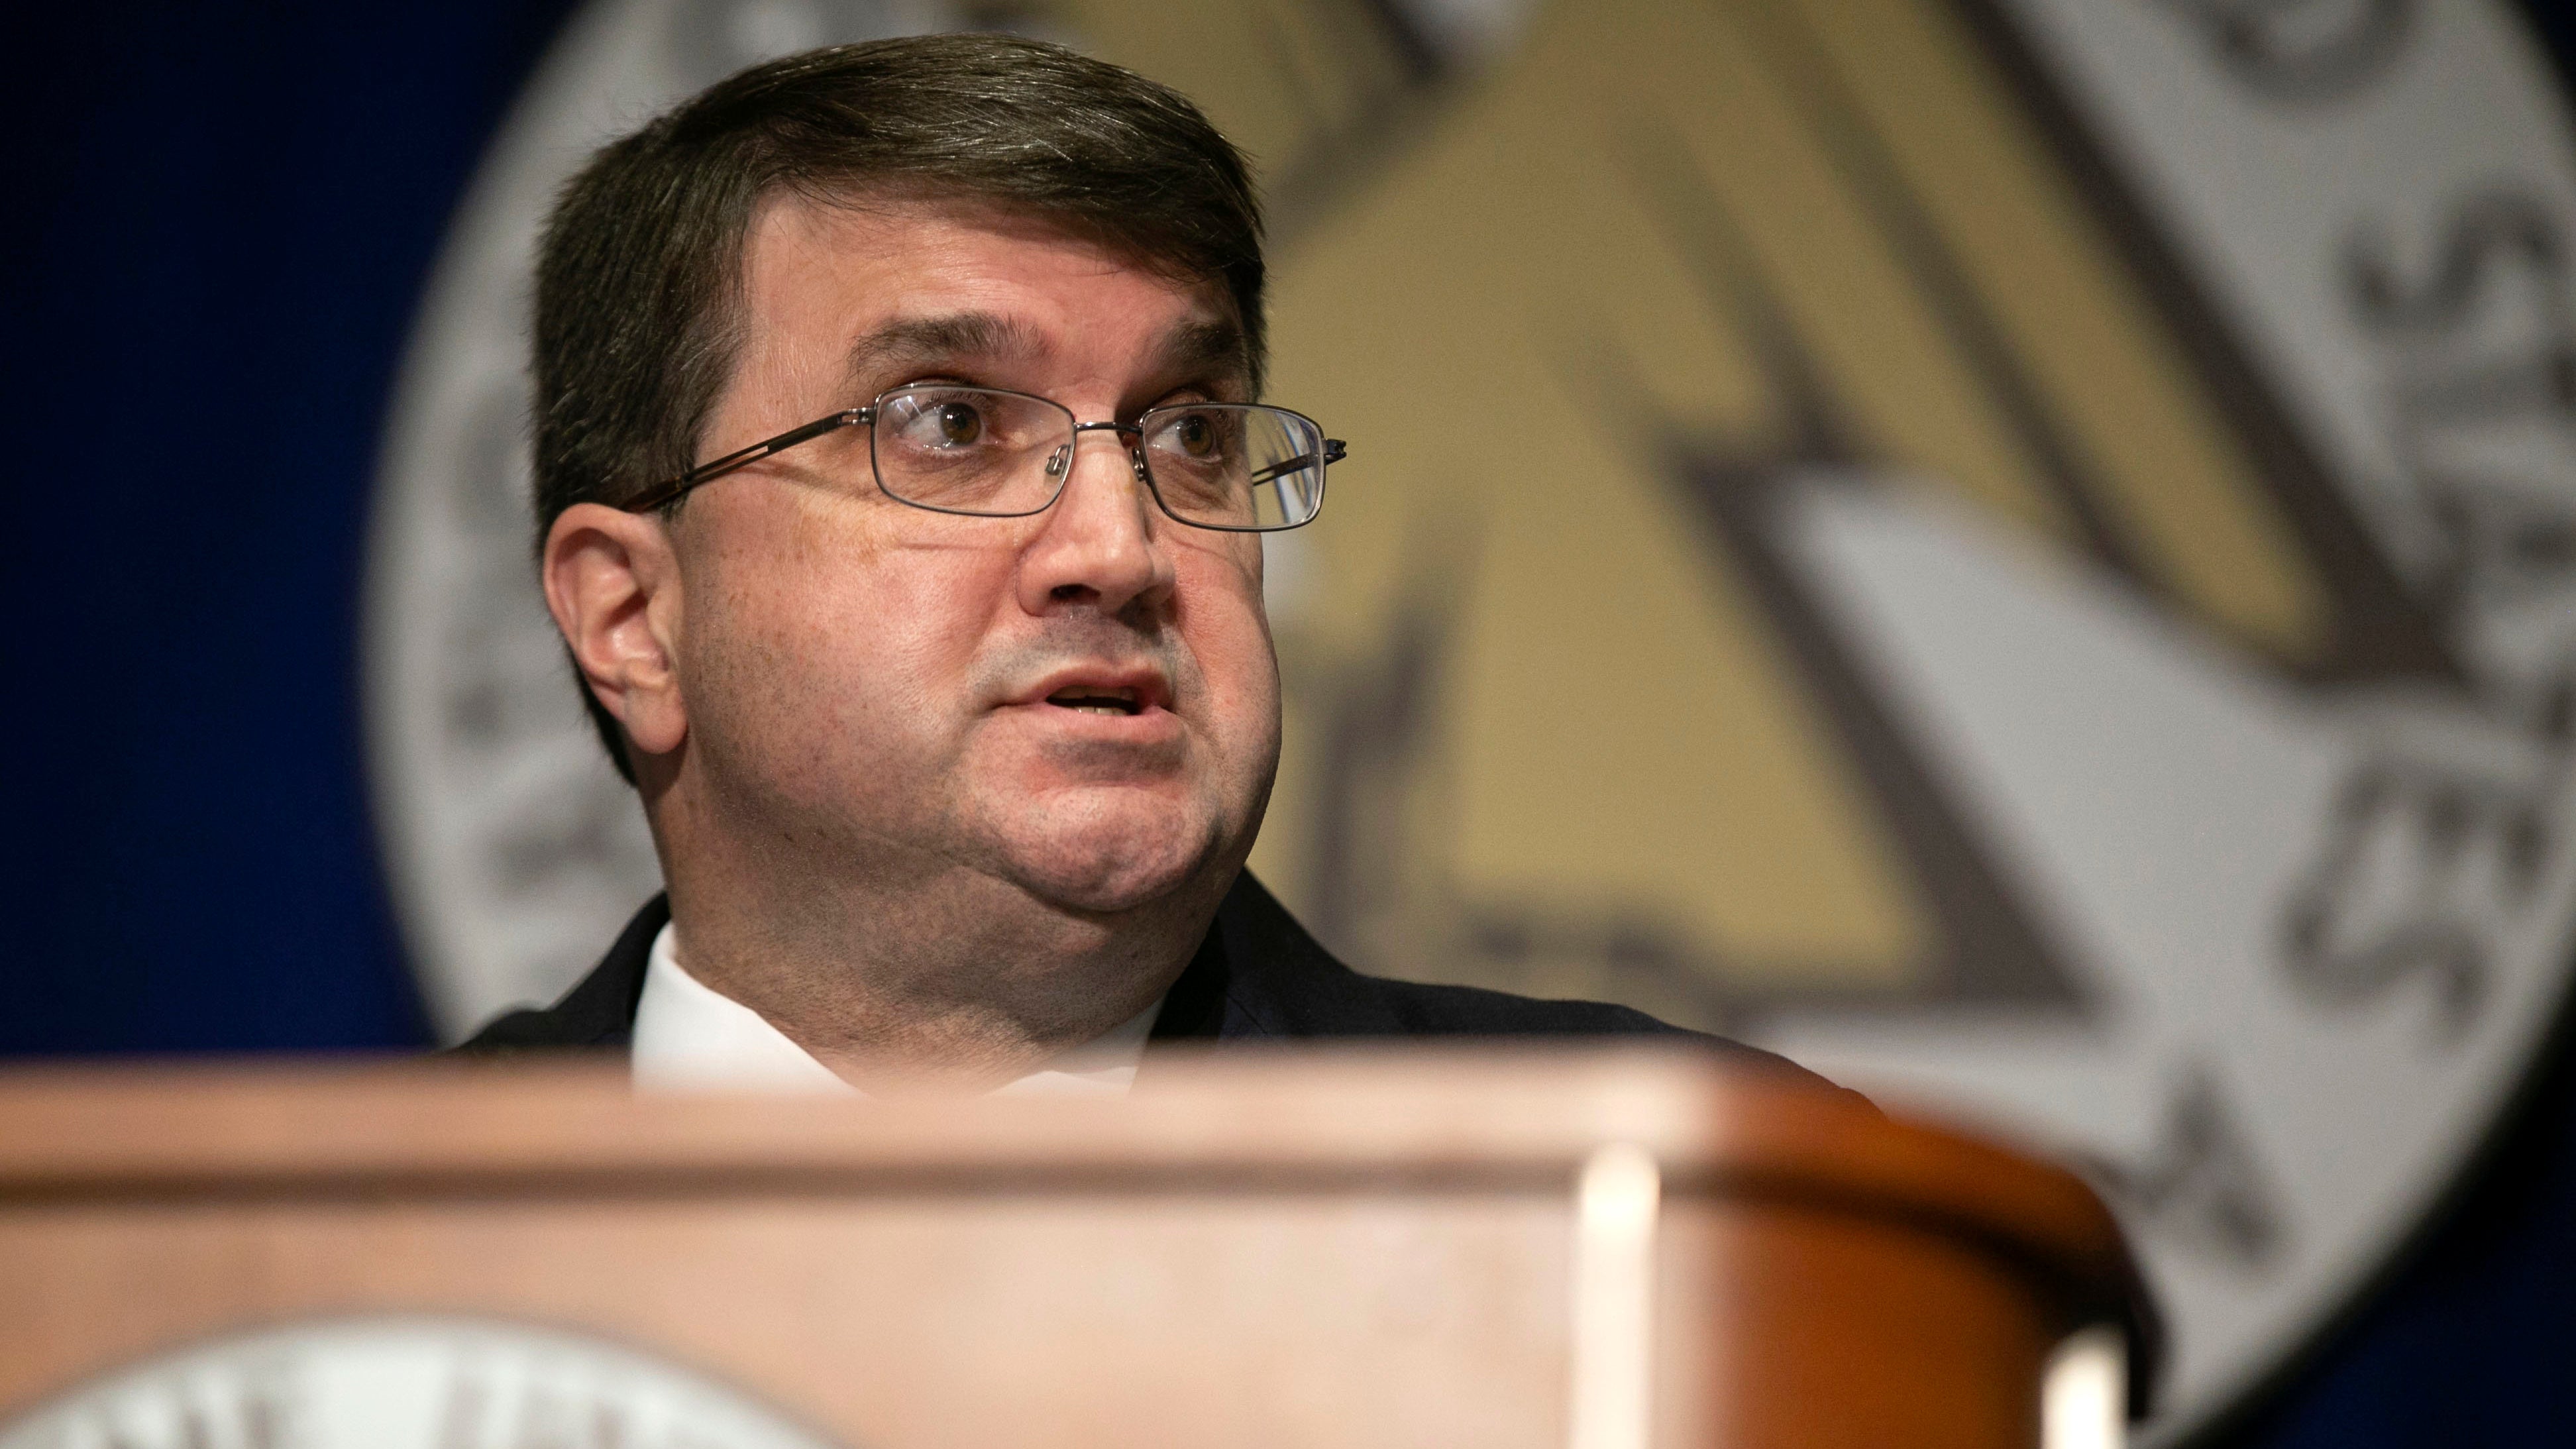 Secretary of Veterans Affairs Robert Wilkie addresses the National Partners Luncheon at the 2019 AUSA Annual Meeting and Exposition at the Washington Convention Center on Oct. 16, 2019.